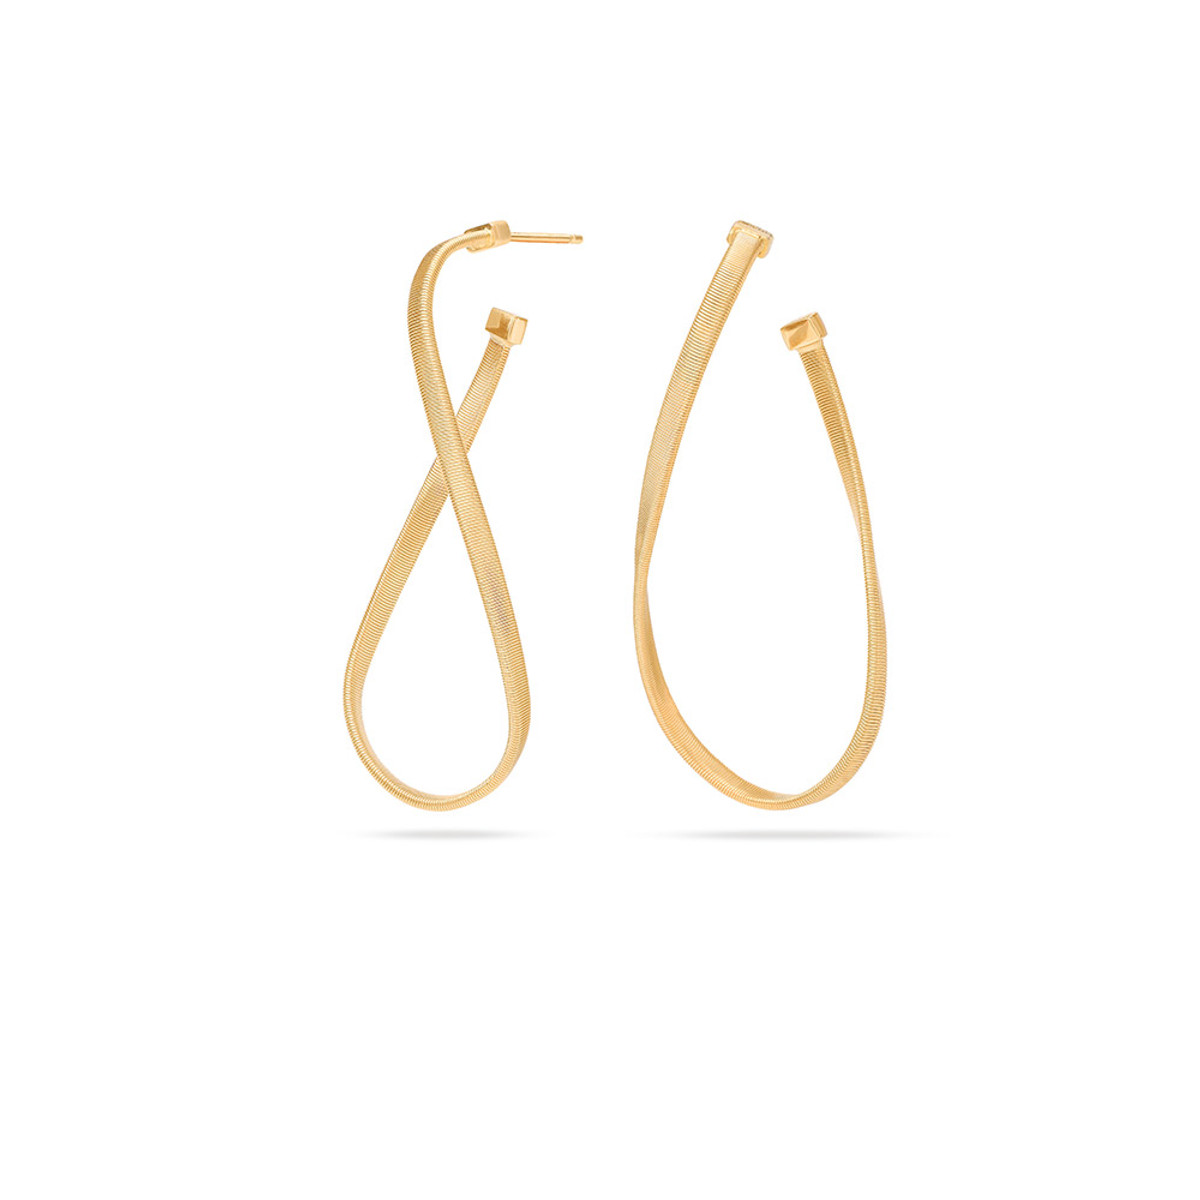 Marco Bicego Marrakech Collection 18K Yellow Gold  Large Hand Twisted Earrings-54421 Product Image